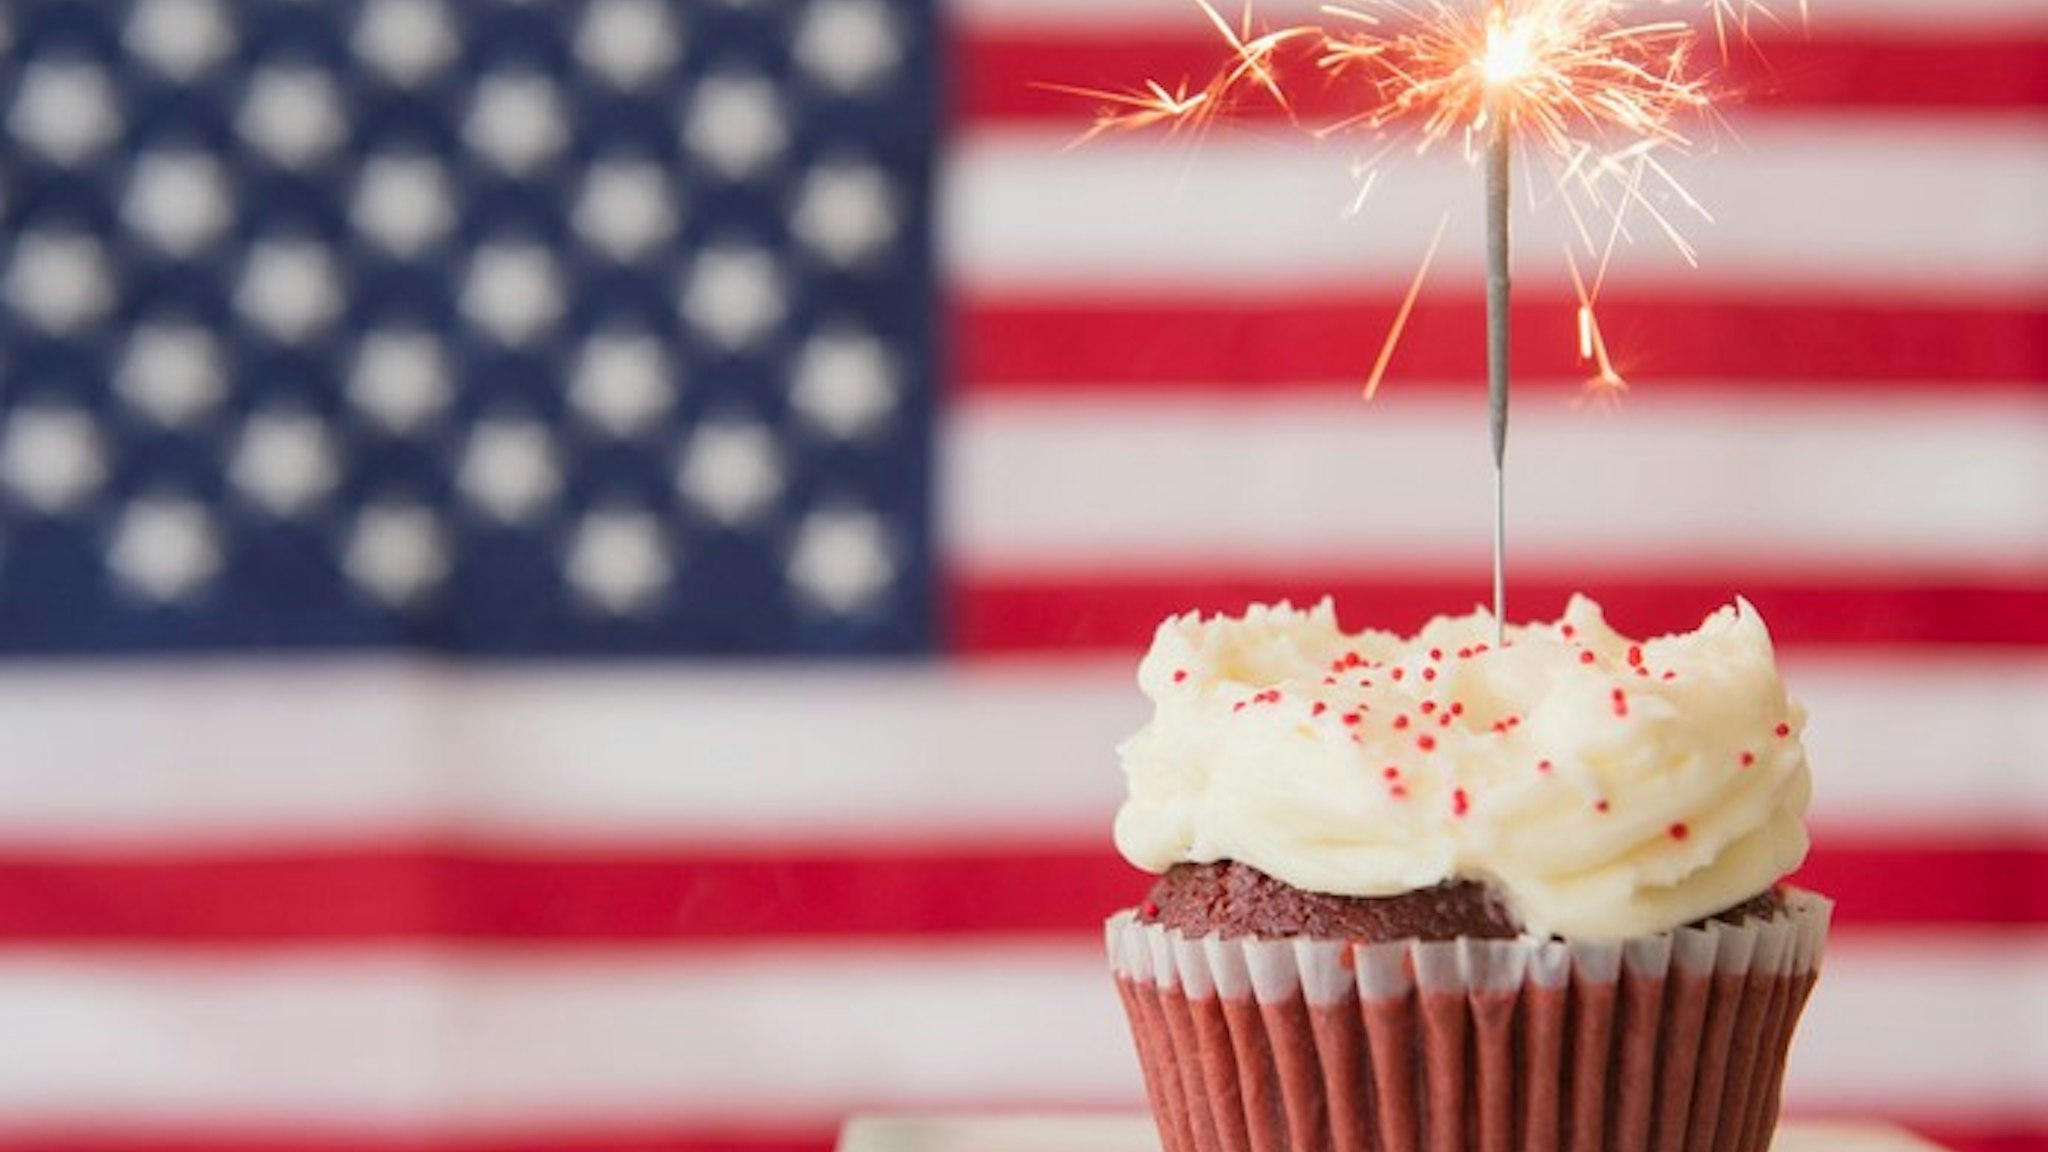 A cupcake stands in front of an American flag